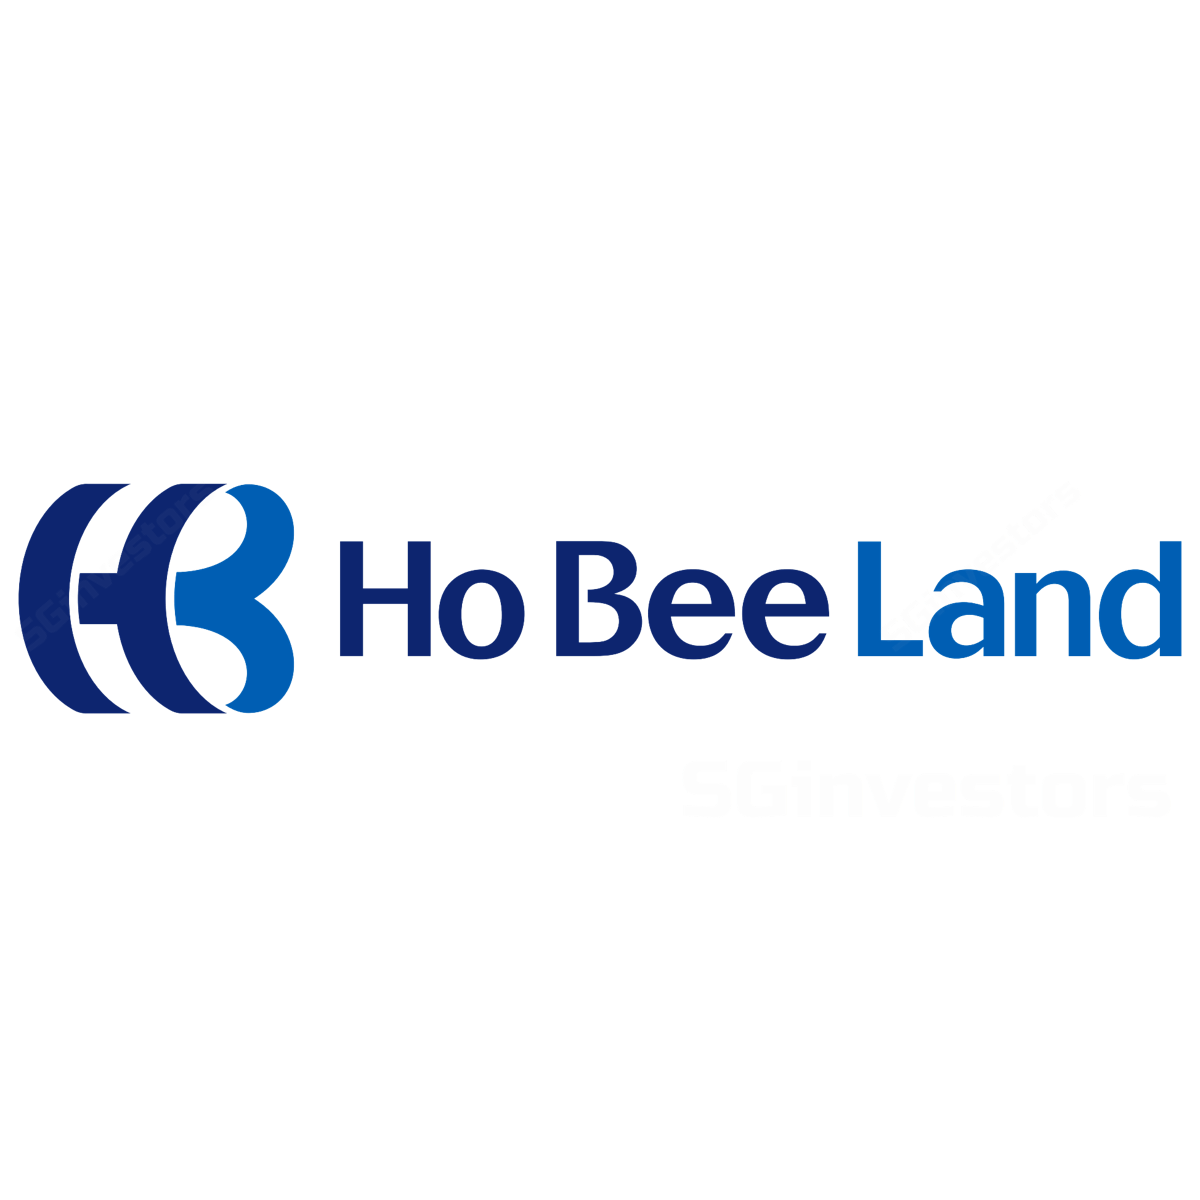 Ho Bee Land (HOBEE SP) - Maybank Kim Eng 2018-03-01: Sentosa Relaunch In The Cards